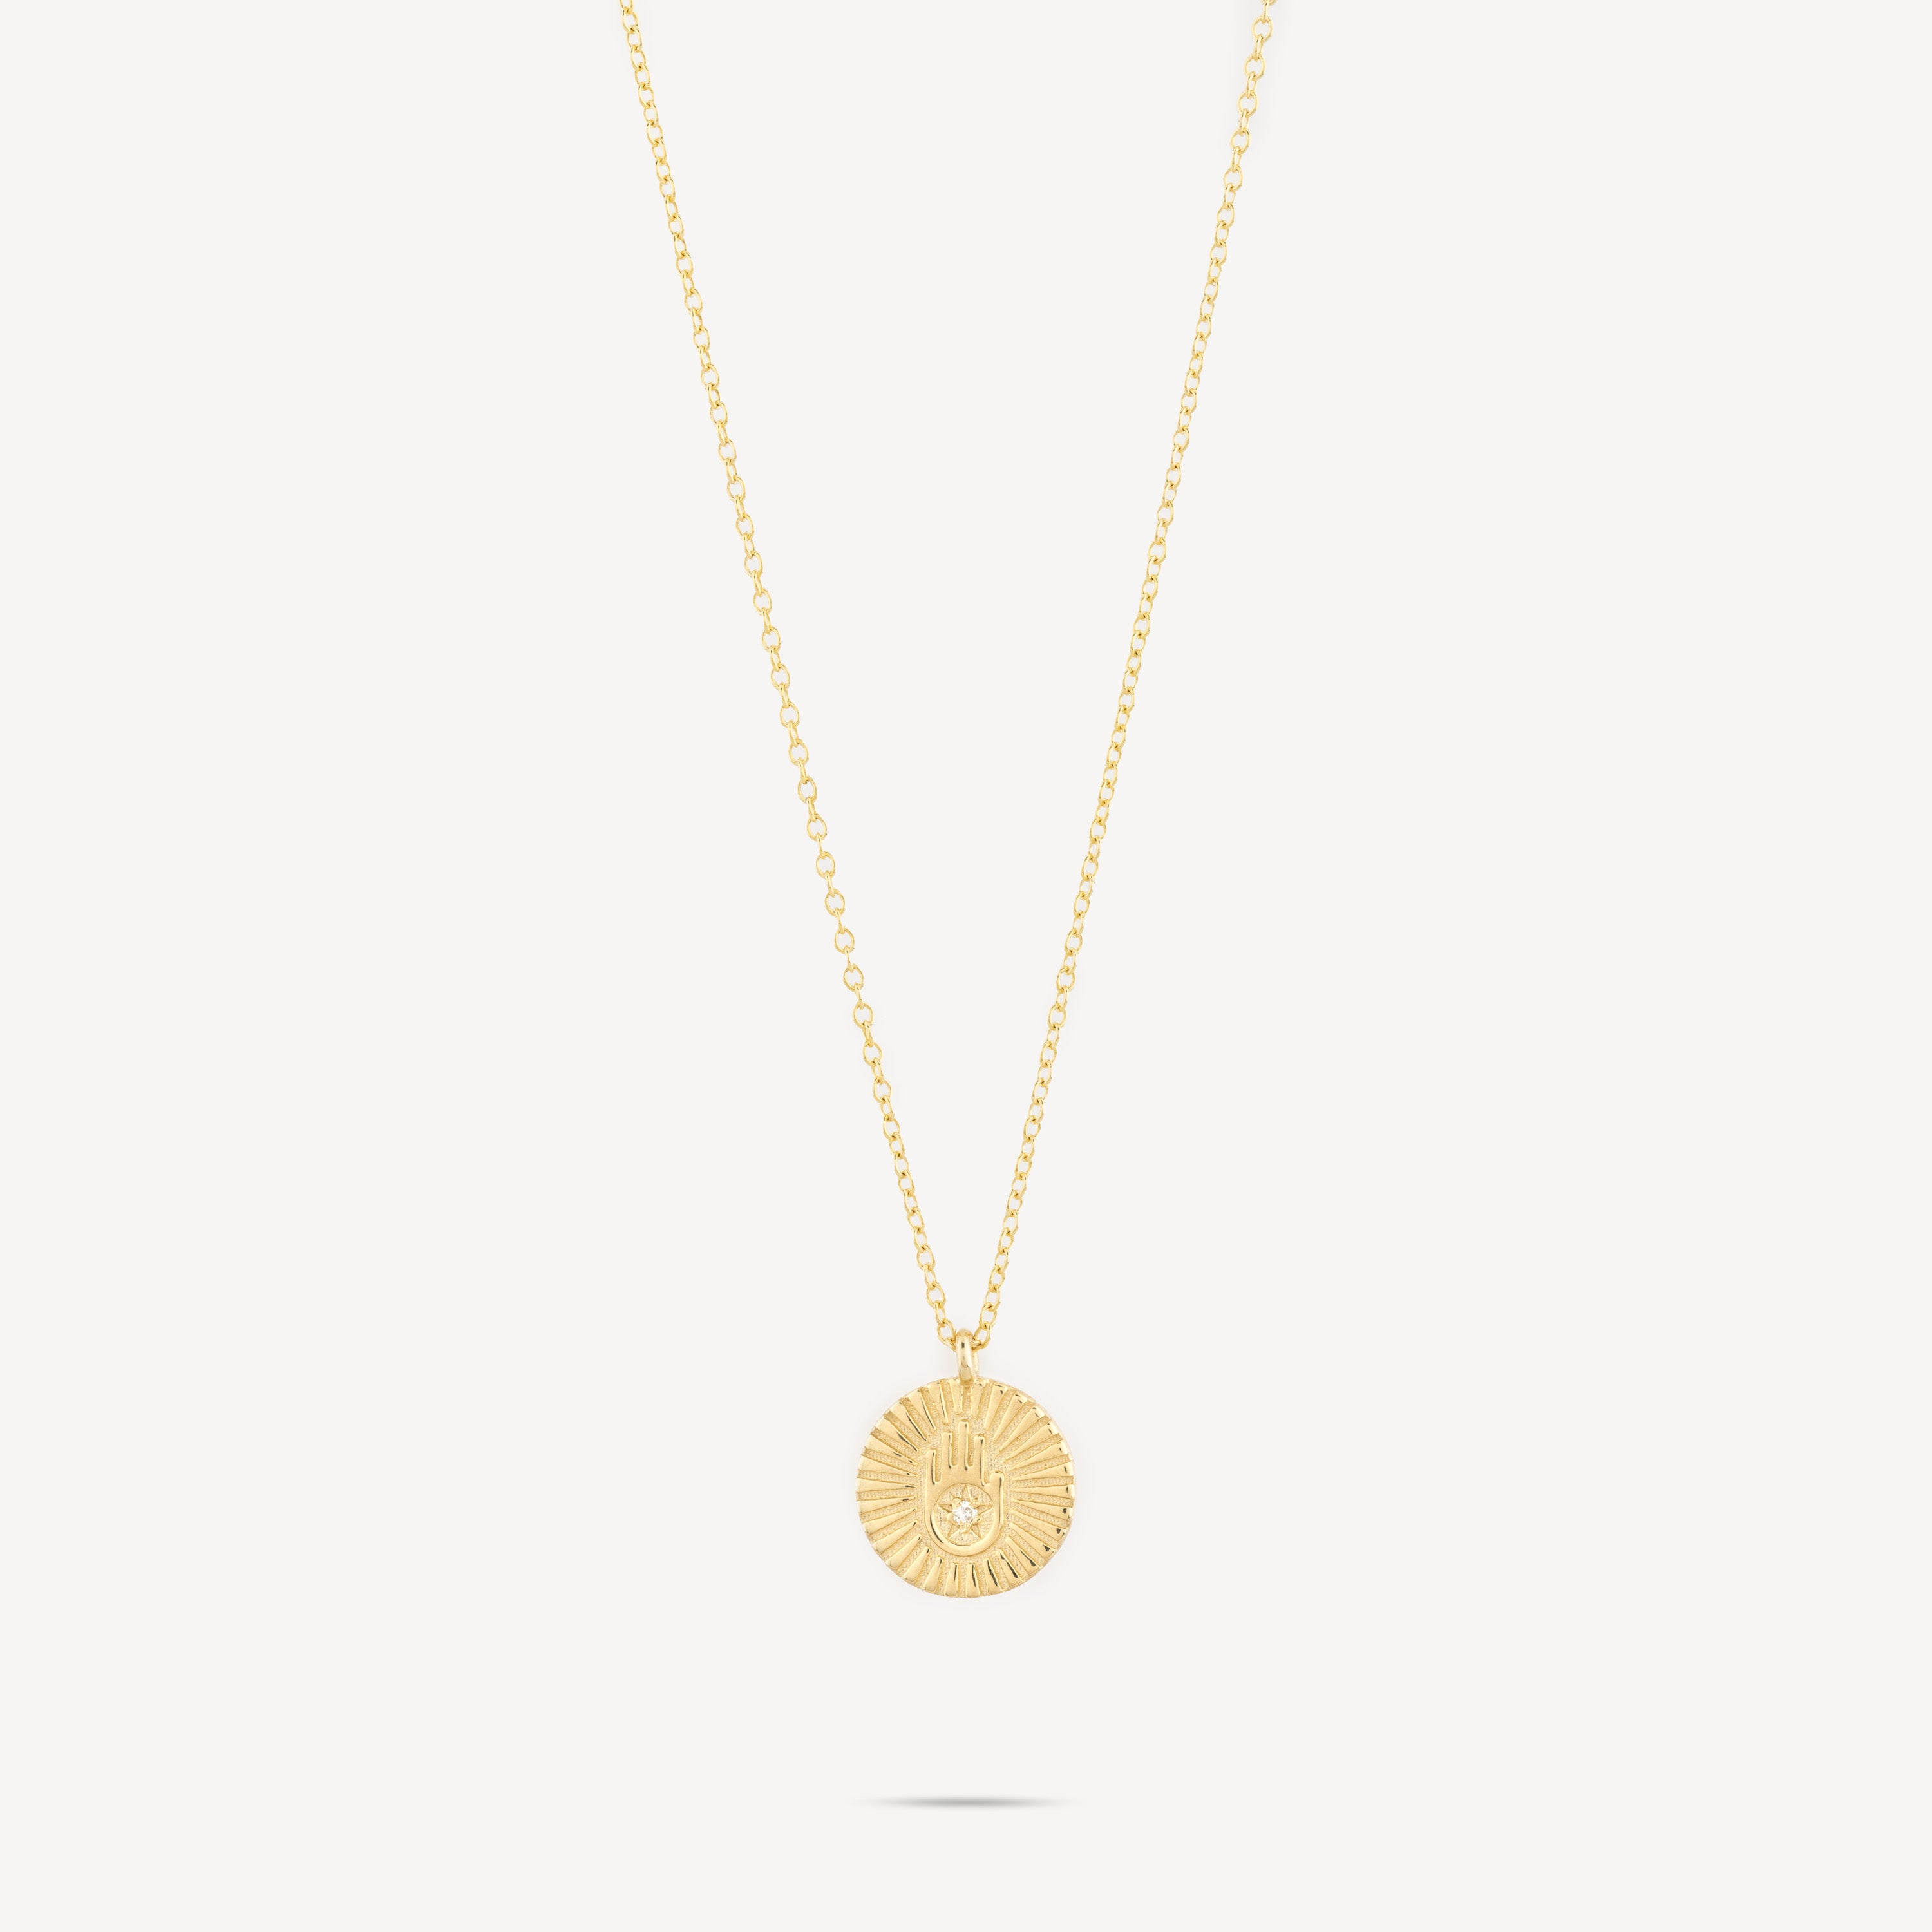 Gold Hamsa Medal Necklace with Diamonds